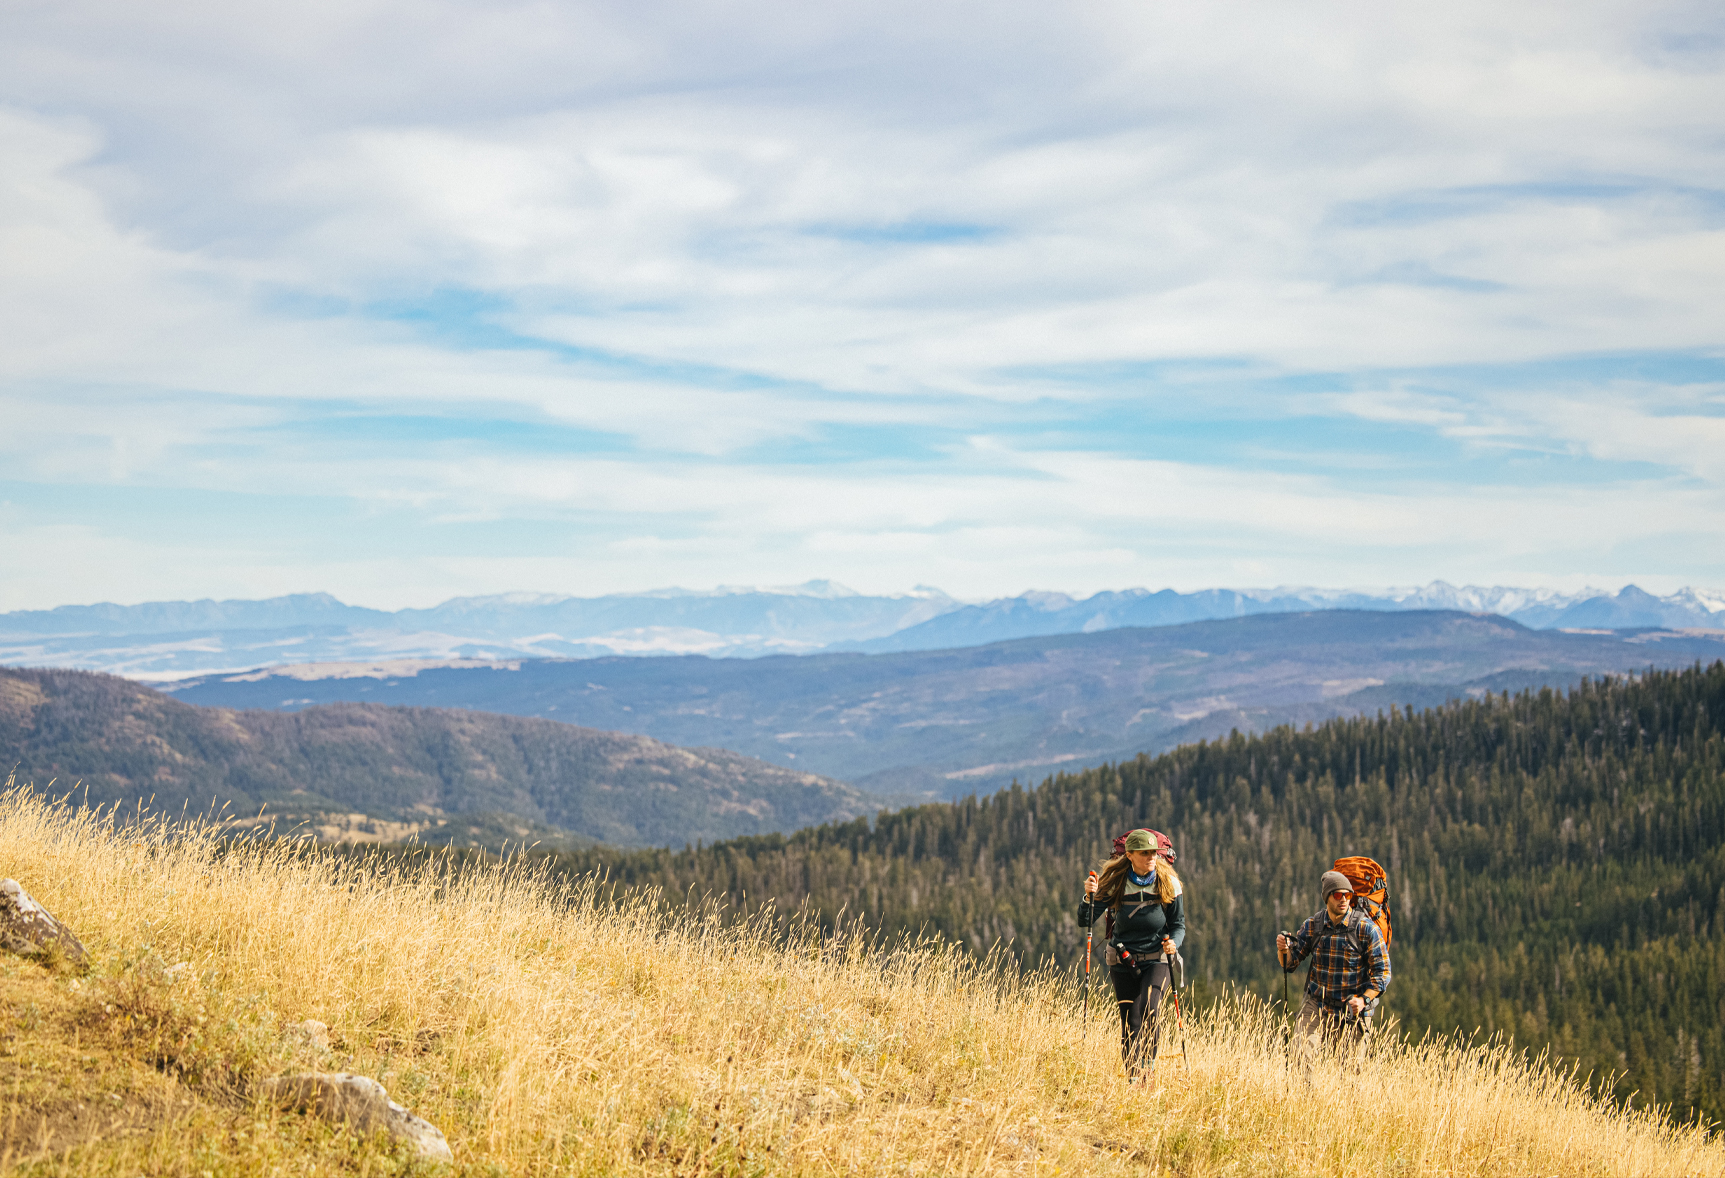 Two hikers bushwhacking a hike in the Montana mountains.